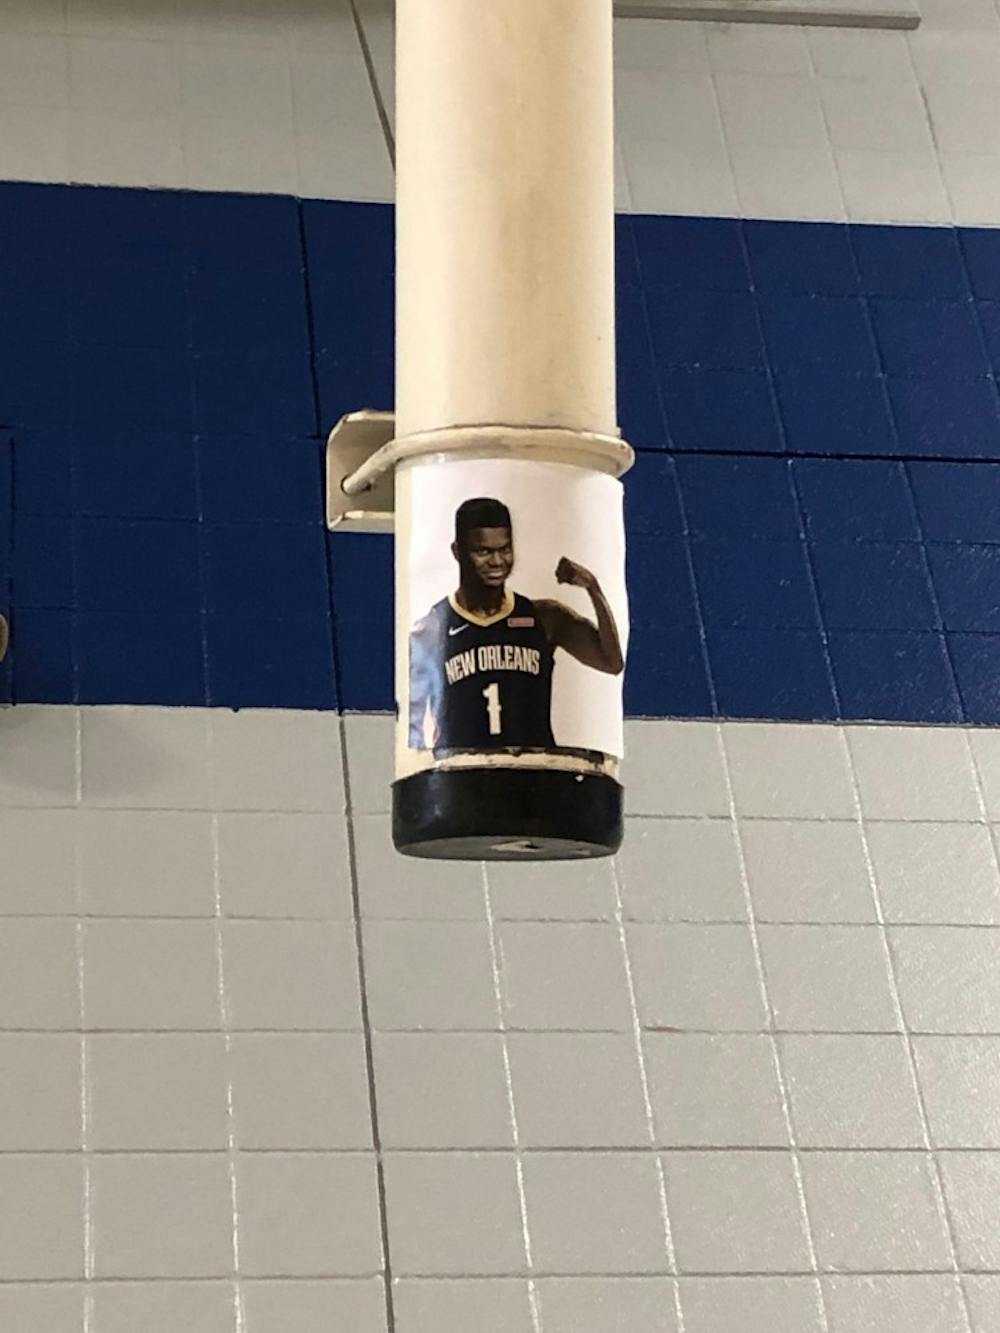 The image of a smirking Williamson ensures nobody will ever forget why pickup games on the first floor of Brodie Recreation Center are now limited to one full court